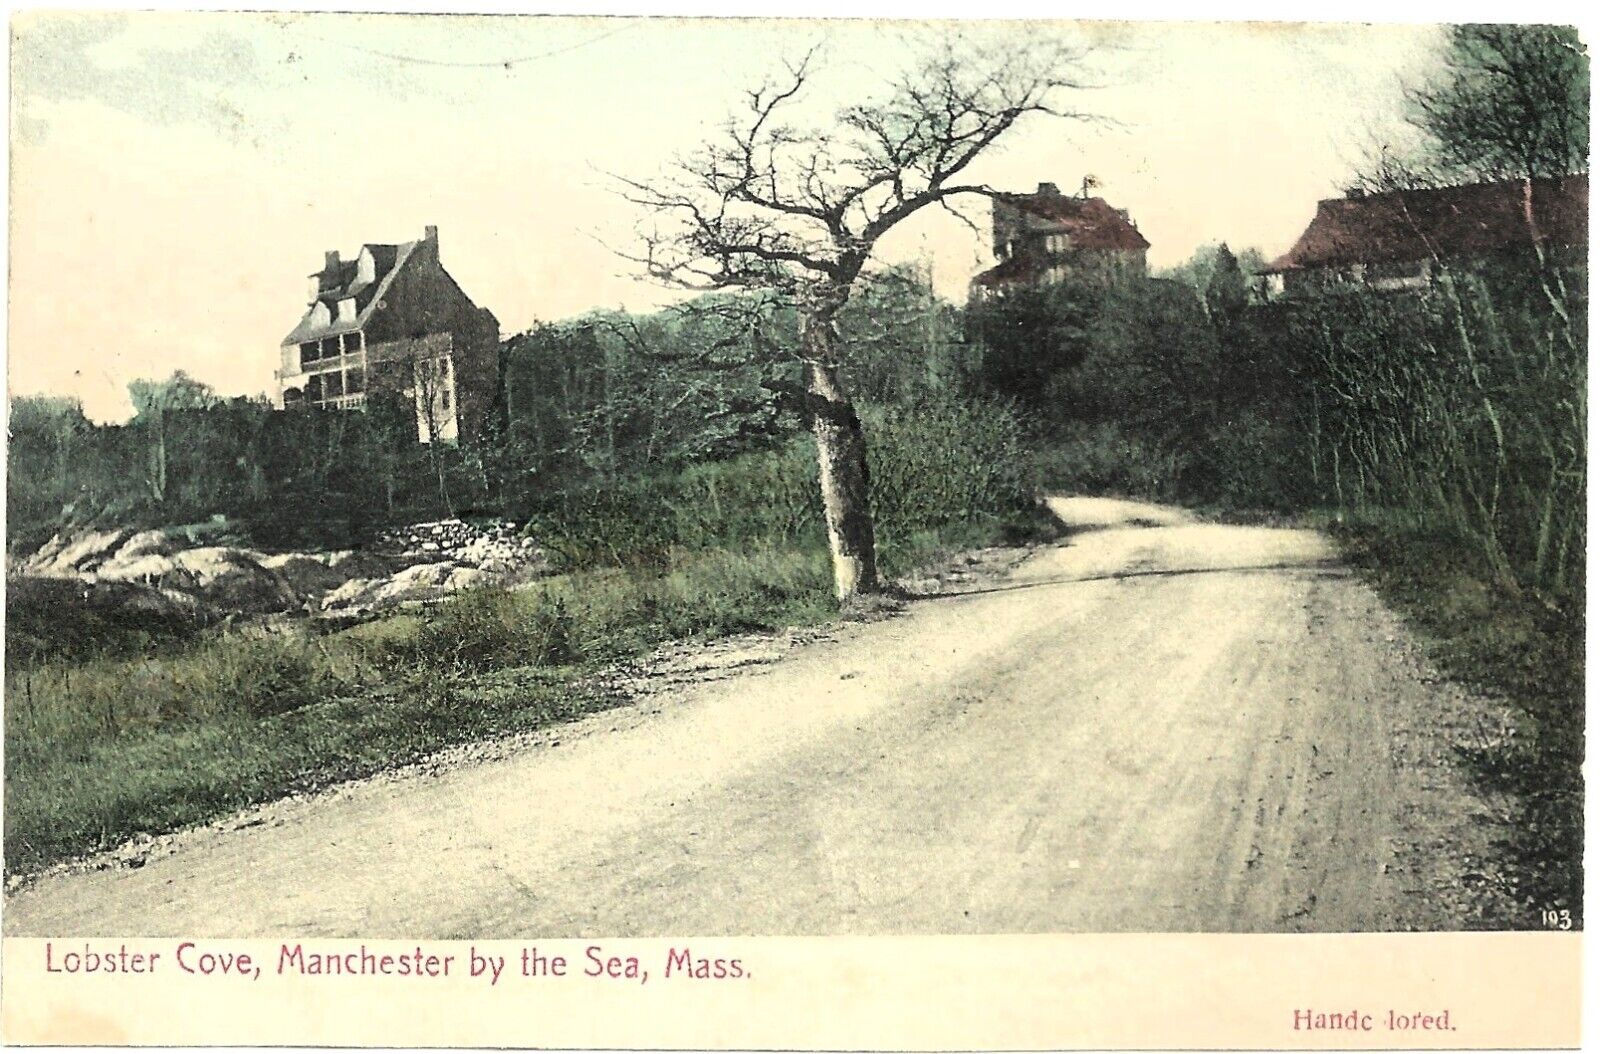 Manchester by the Sea, mass., postcard: Lobster Cove, hand colored